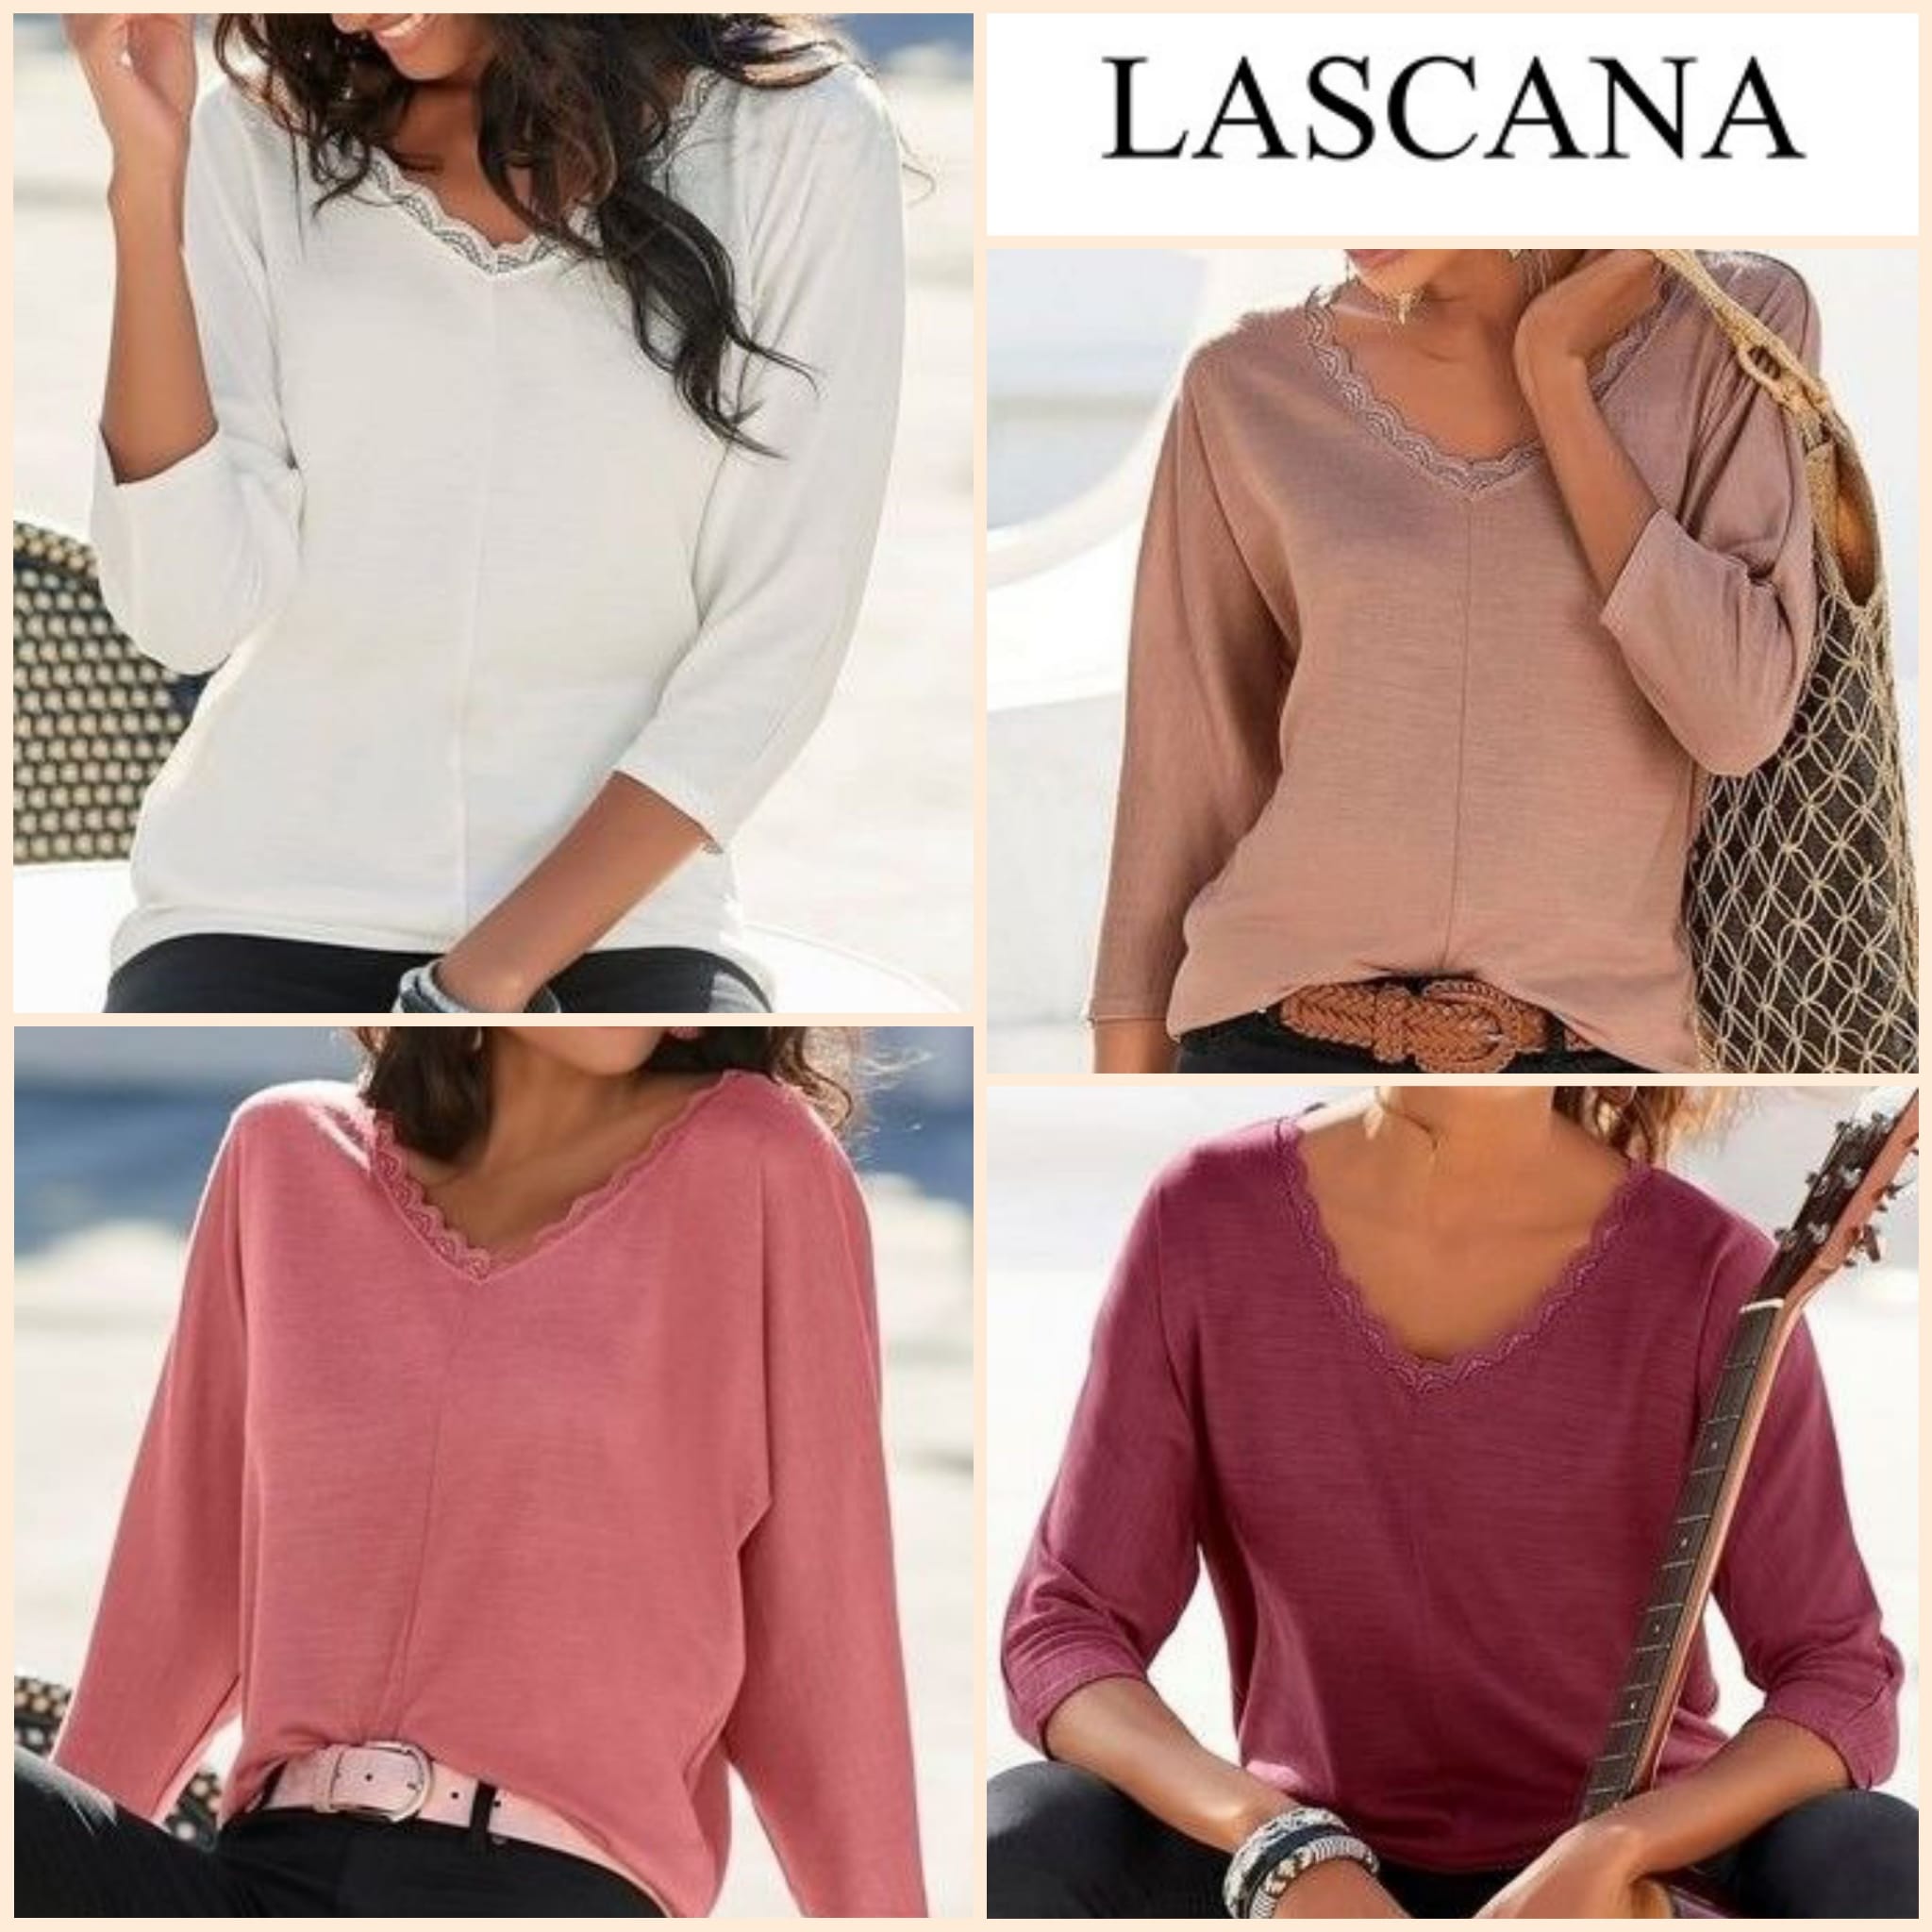 Women's T-shirts from Lascana 